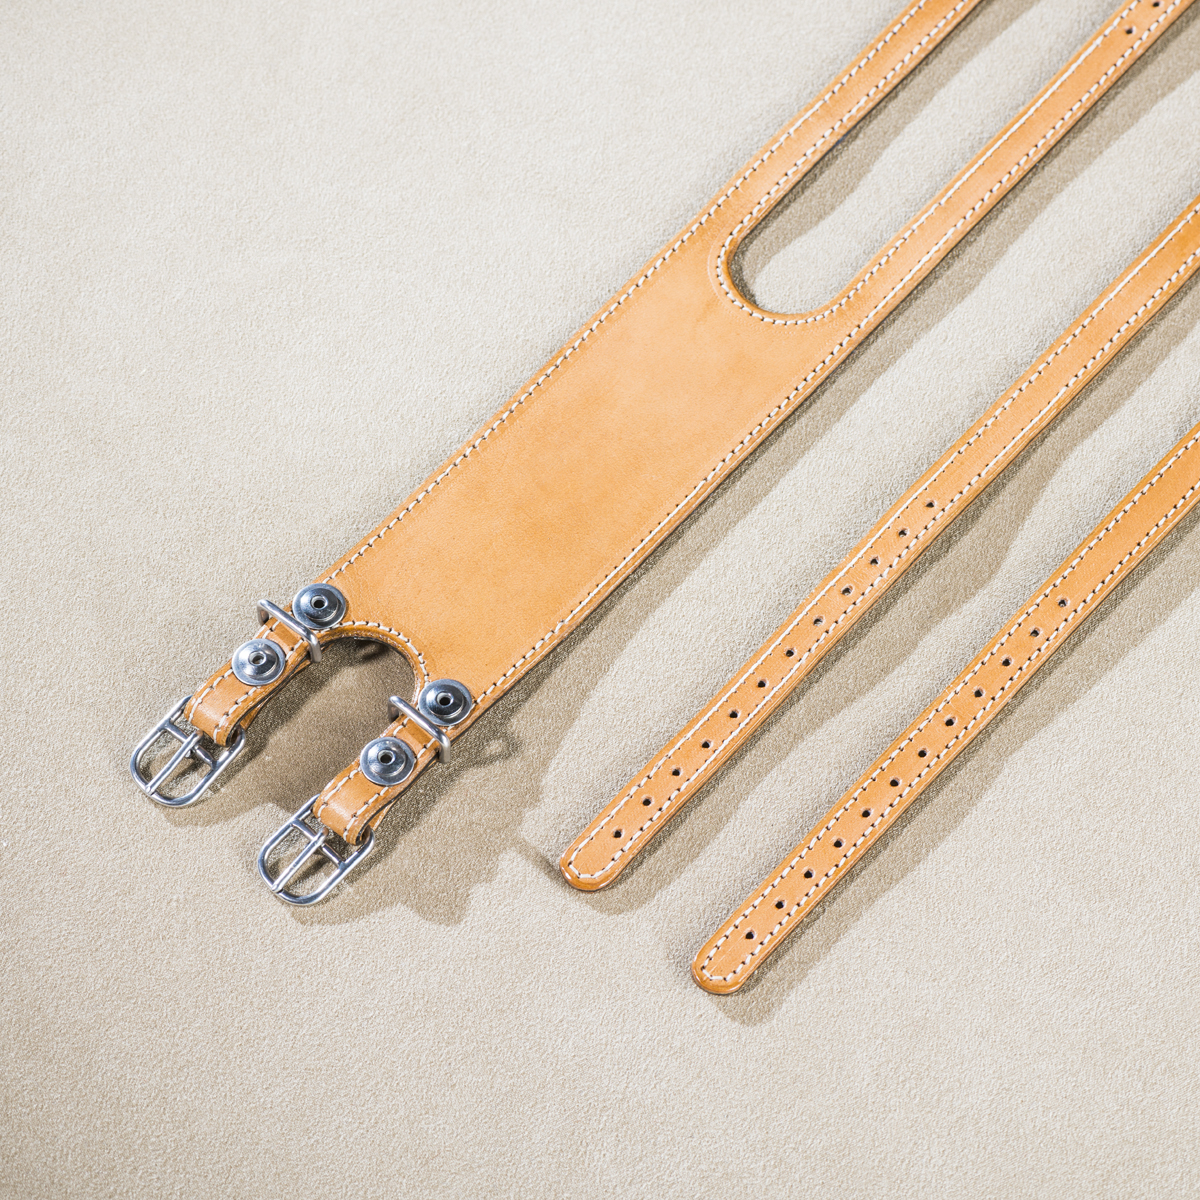 Leather straps for fixed gear Beige 4.